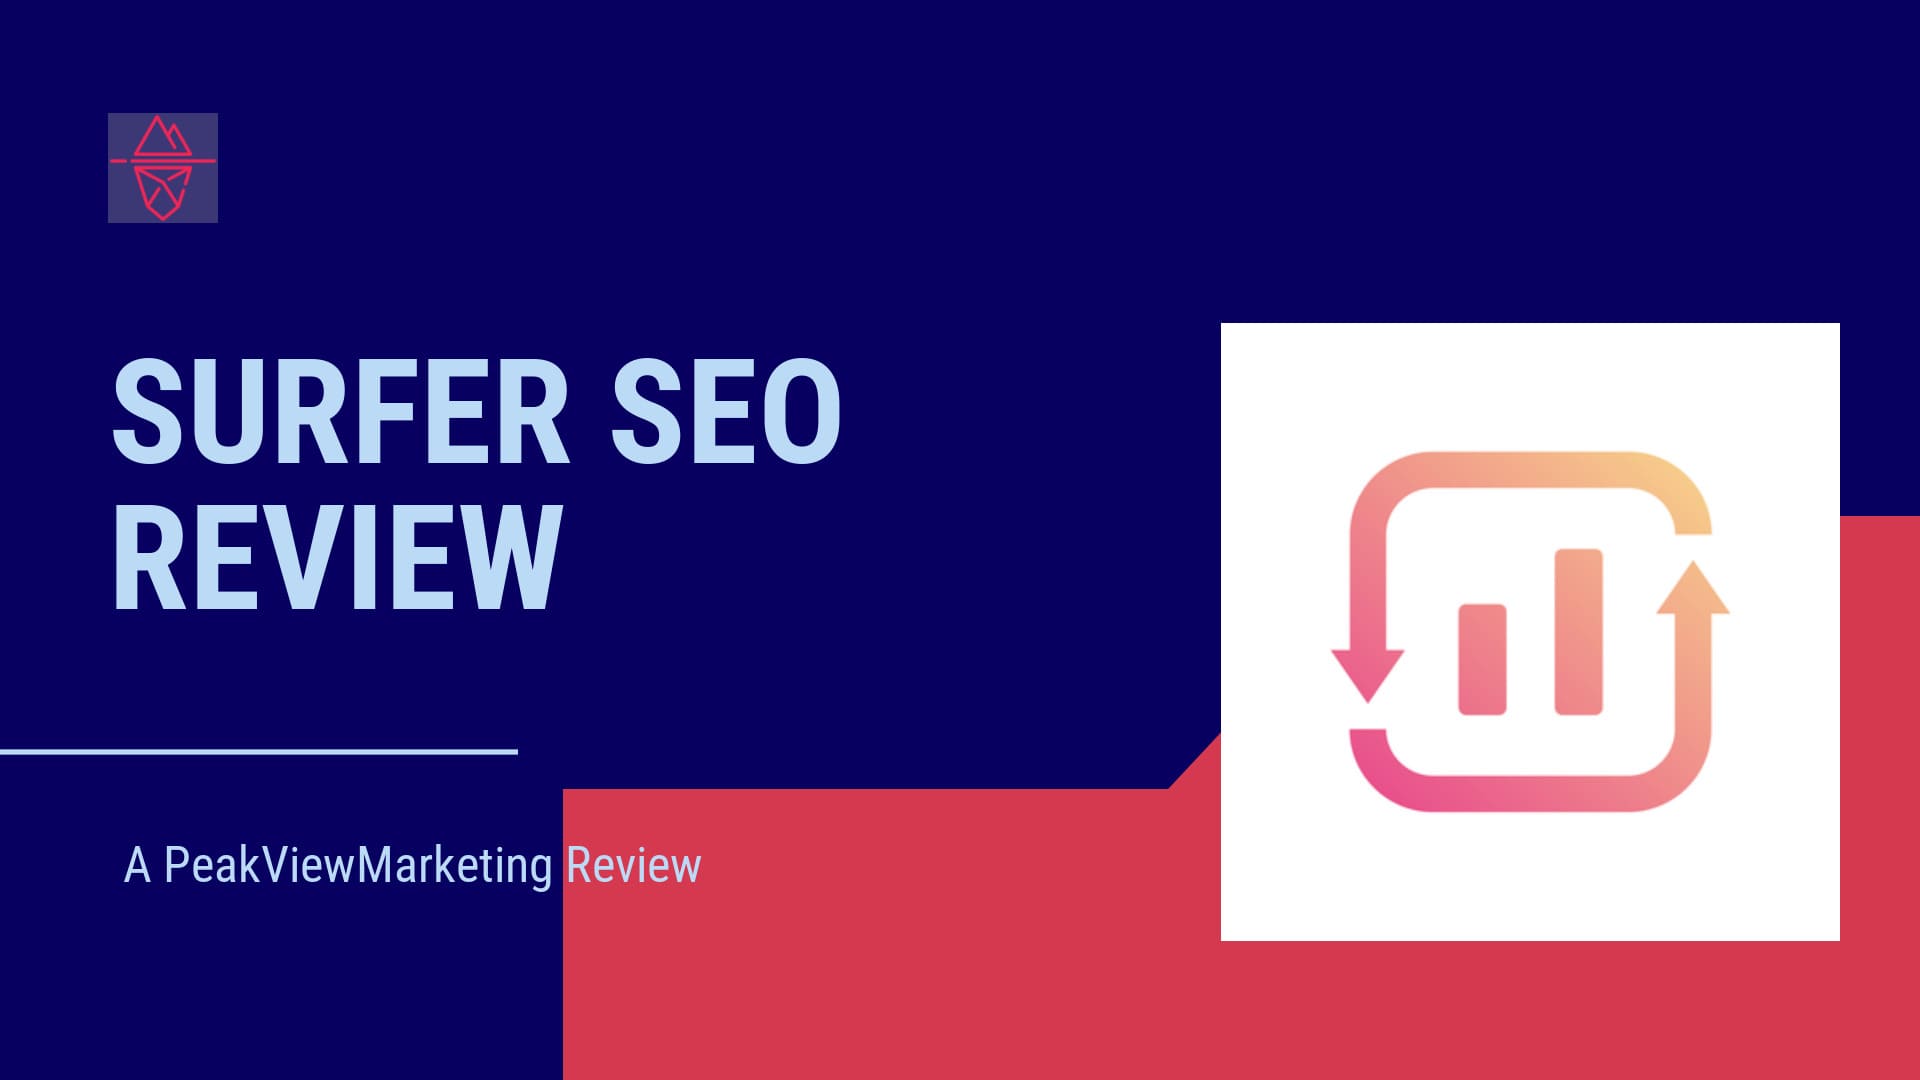 Surfer SEO Review Image